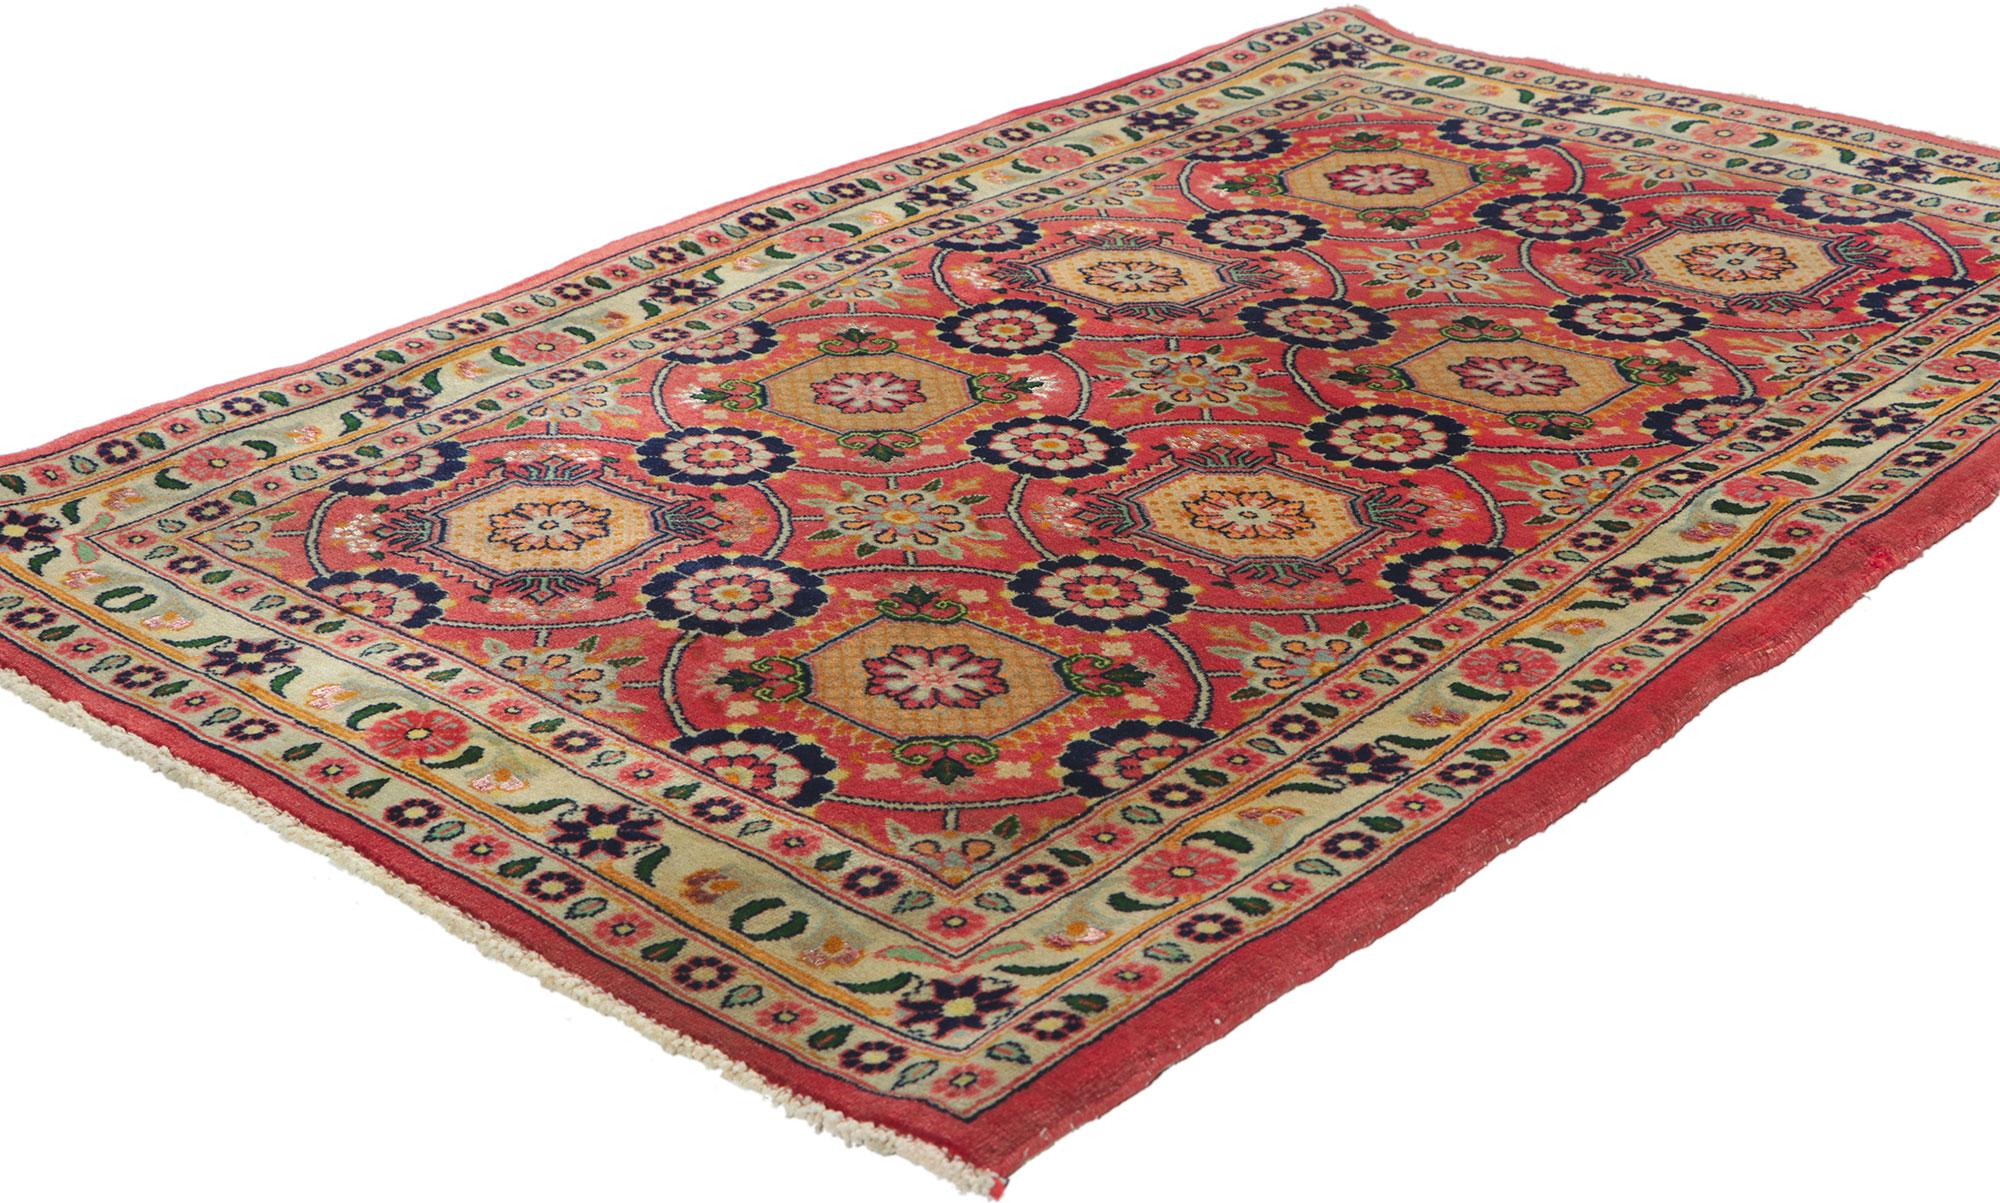 61041 Vintage Persian Bijar Rug, 02'07 x 03'11. Embark on an enchanting odyssey of Moorish elegance with this hand-knotted wool vintage Persian Bijar rug. This magical carpet ride is a voyage into a world awash with hues reminiscent of Islamic tile